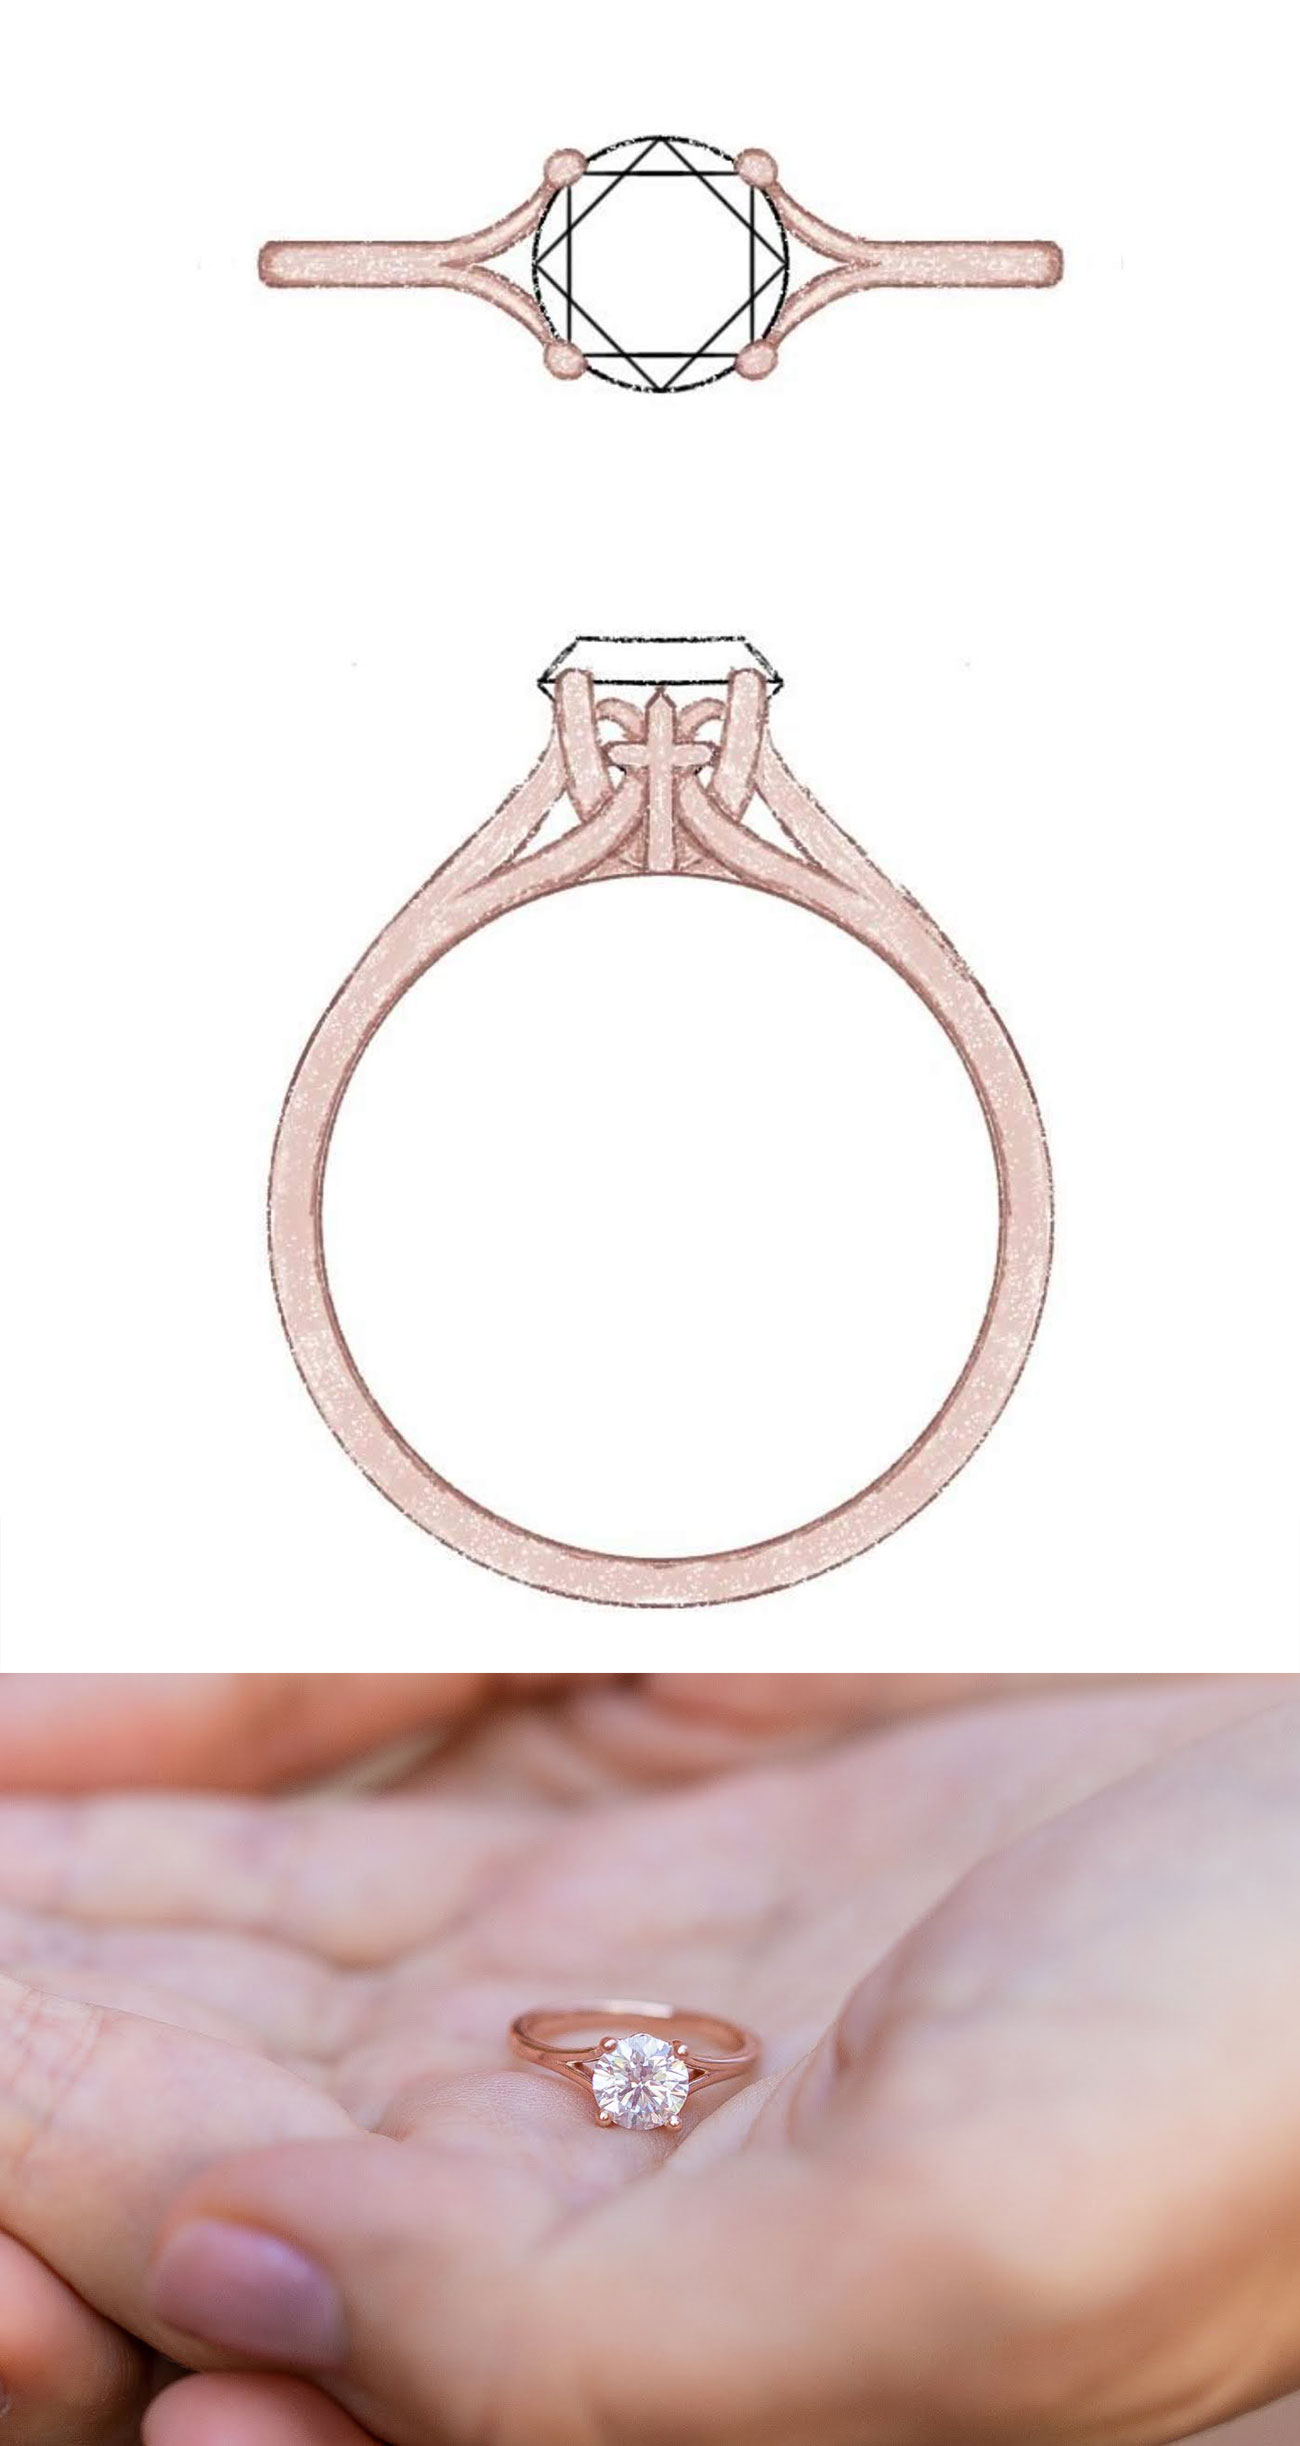 CustomMade engagement ring inspired by faith